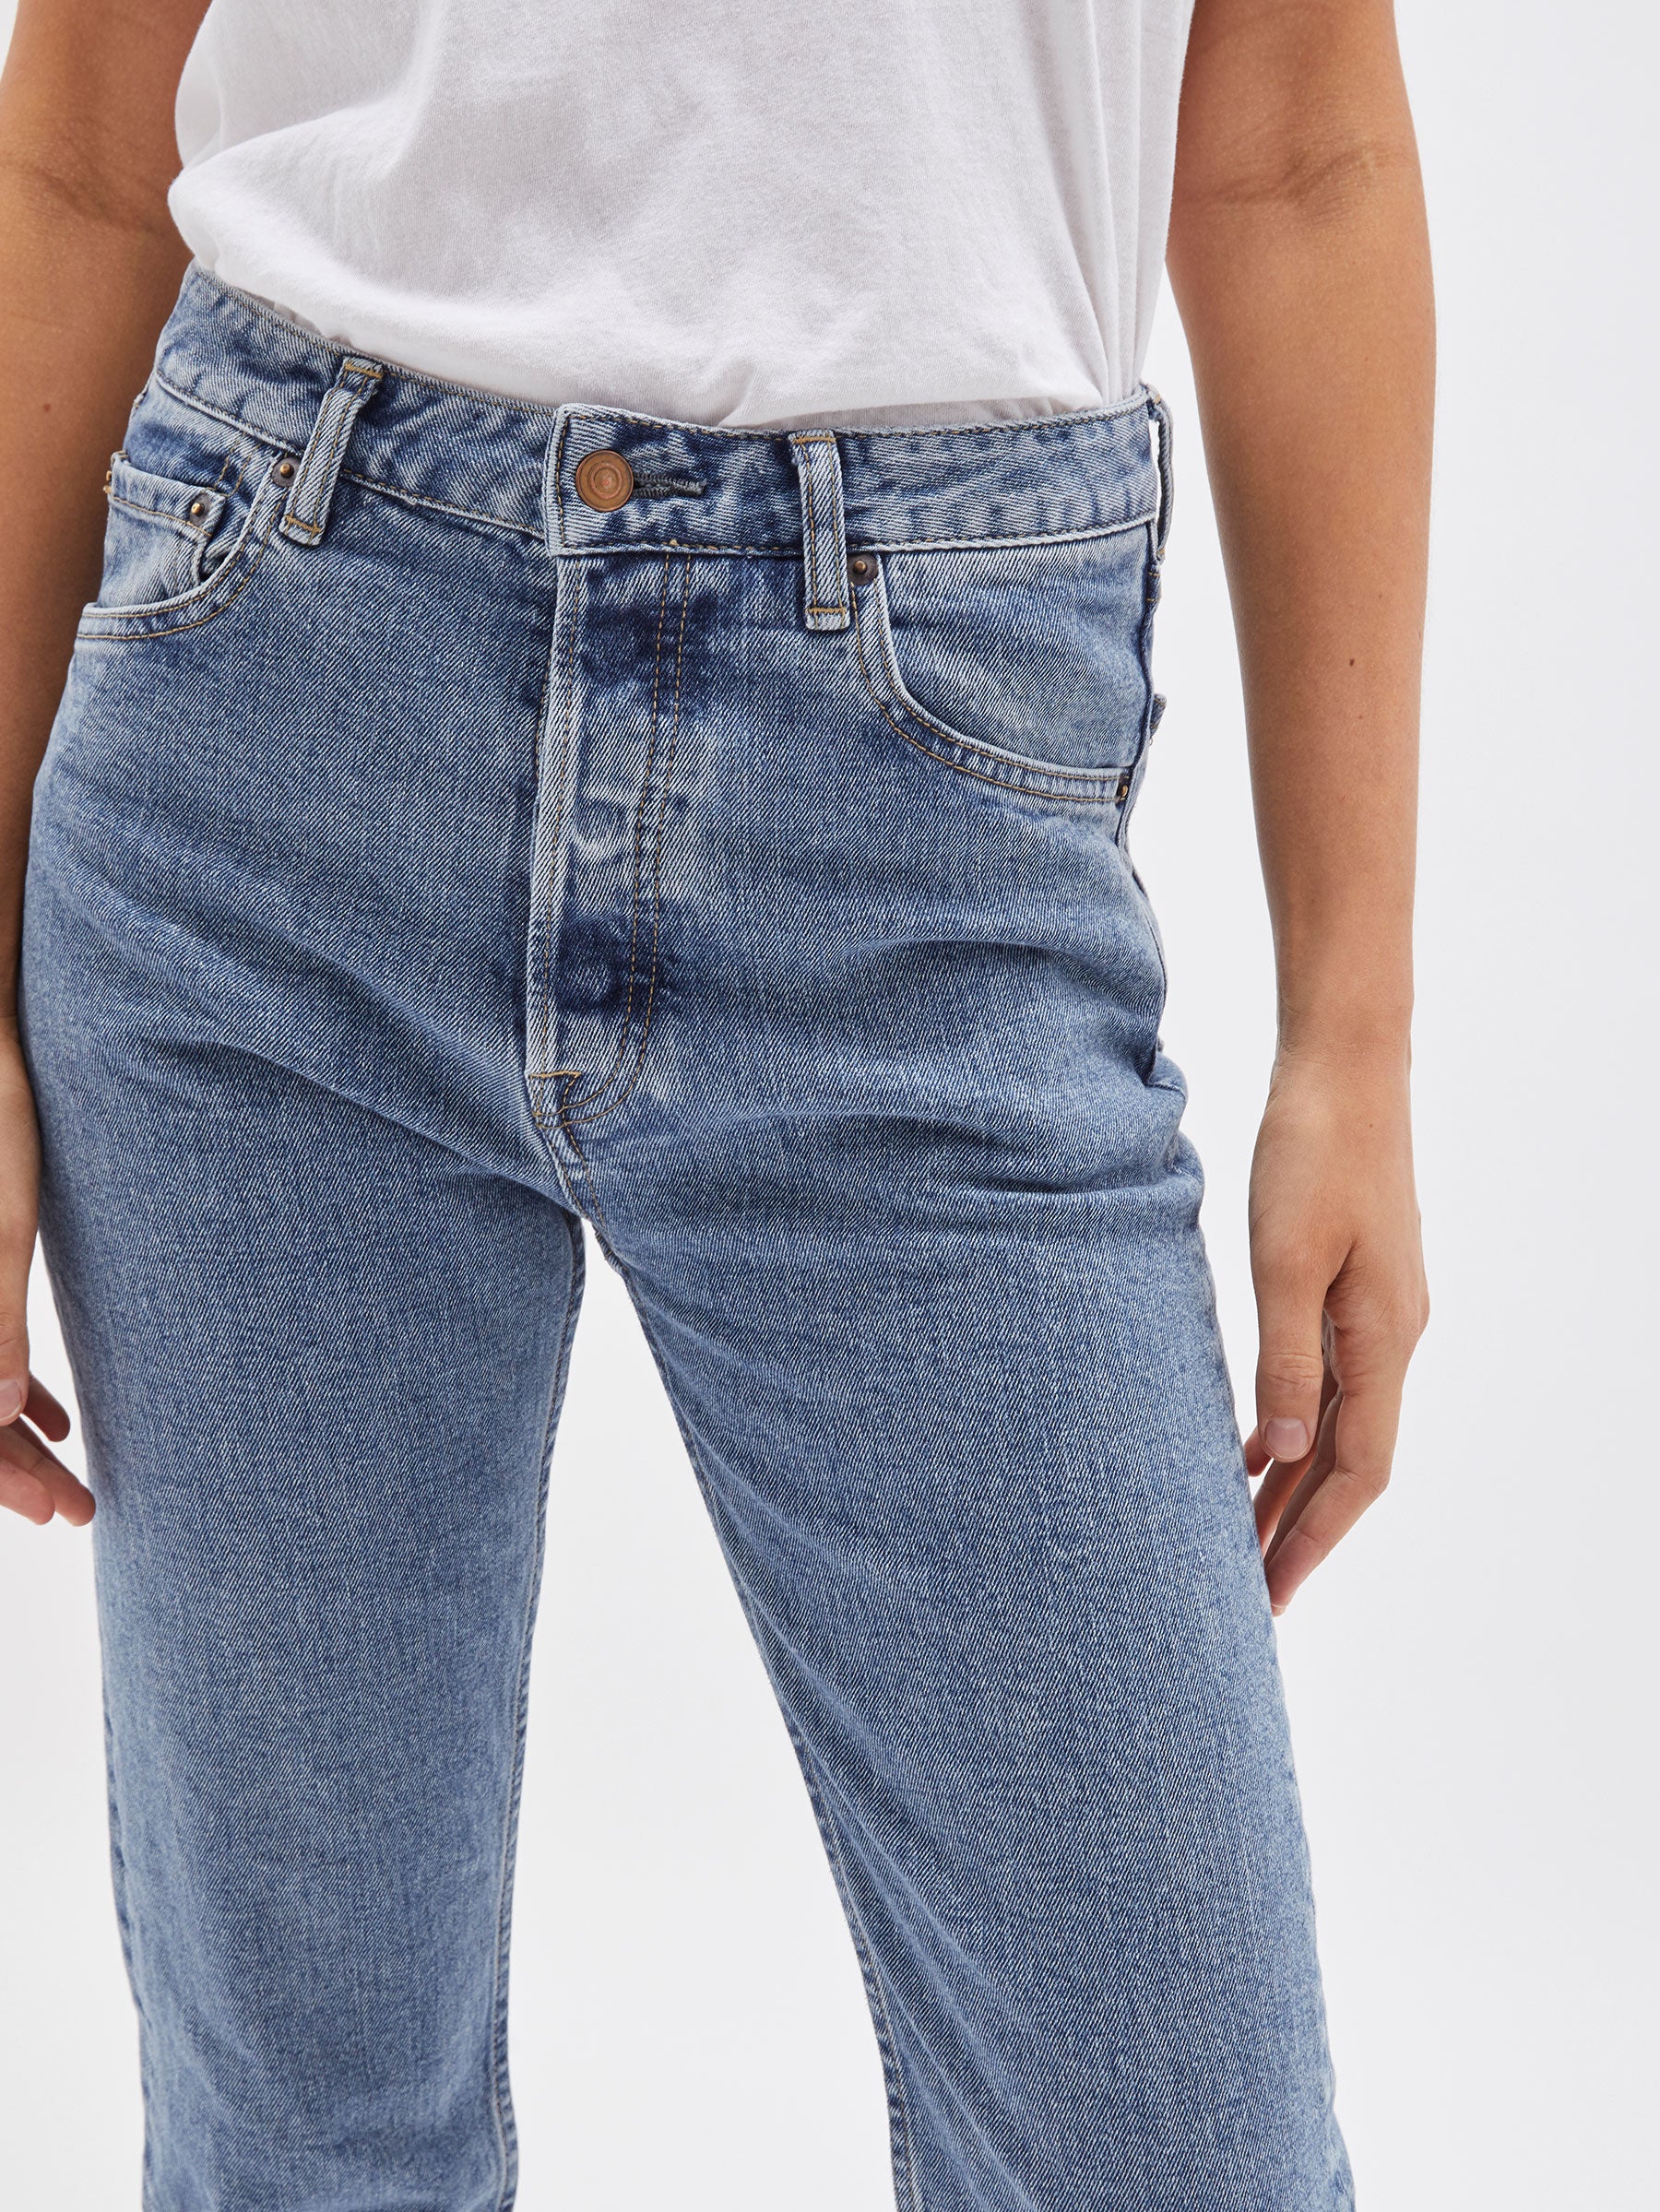 classic crop jean in worn out wash